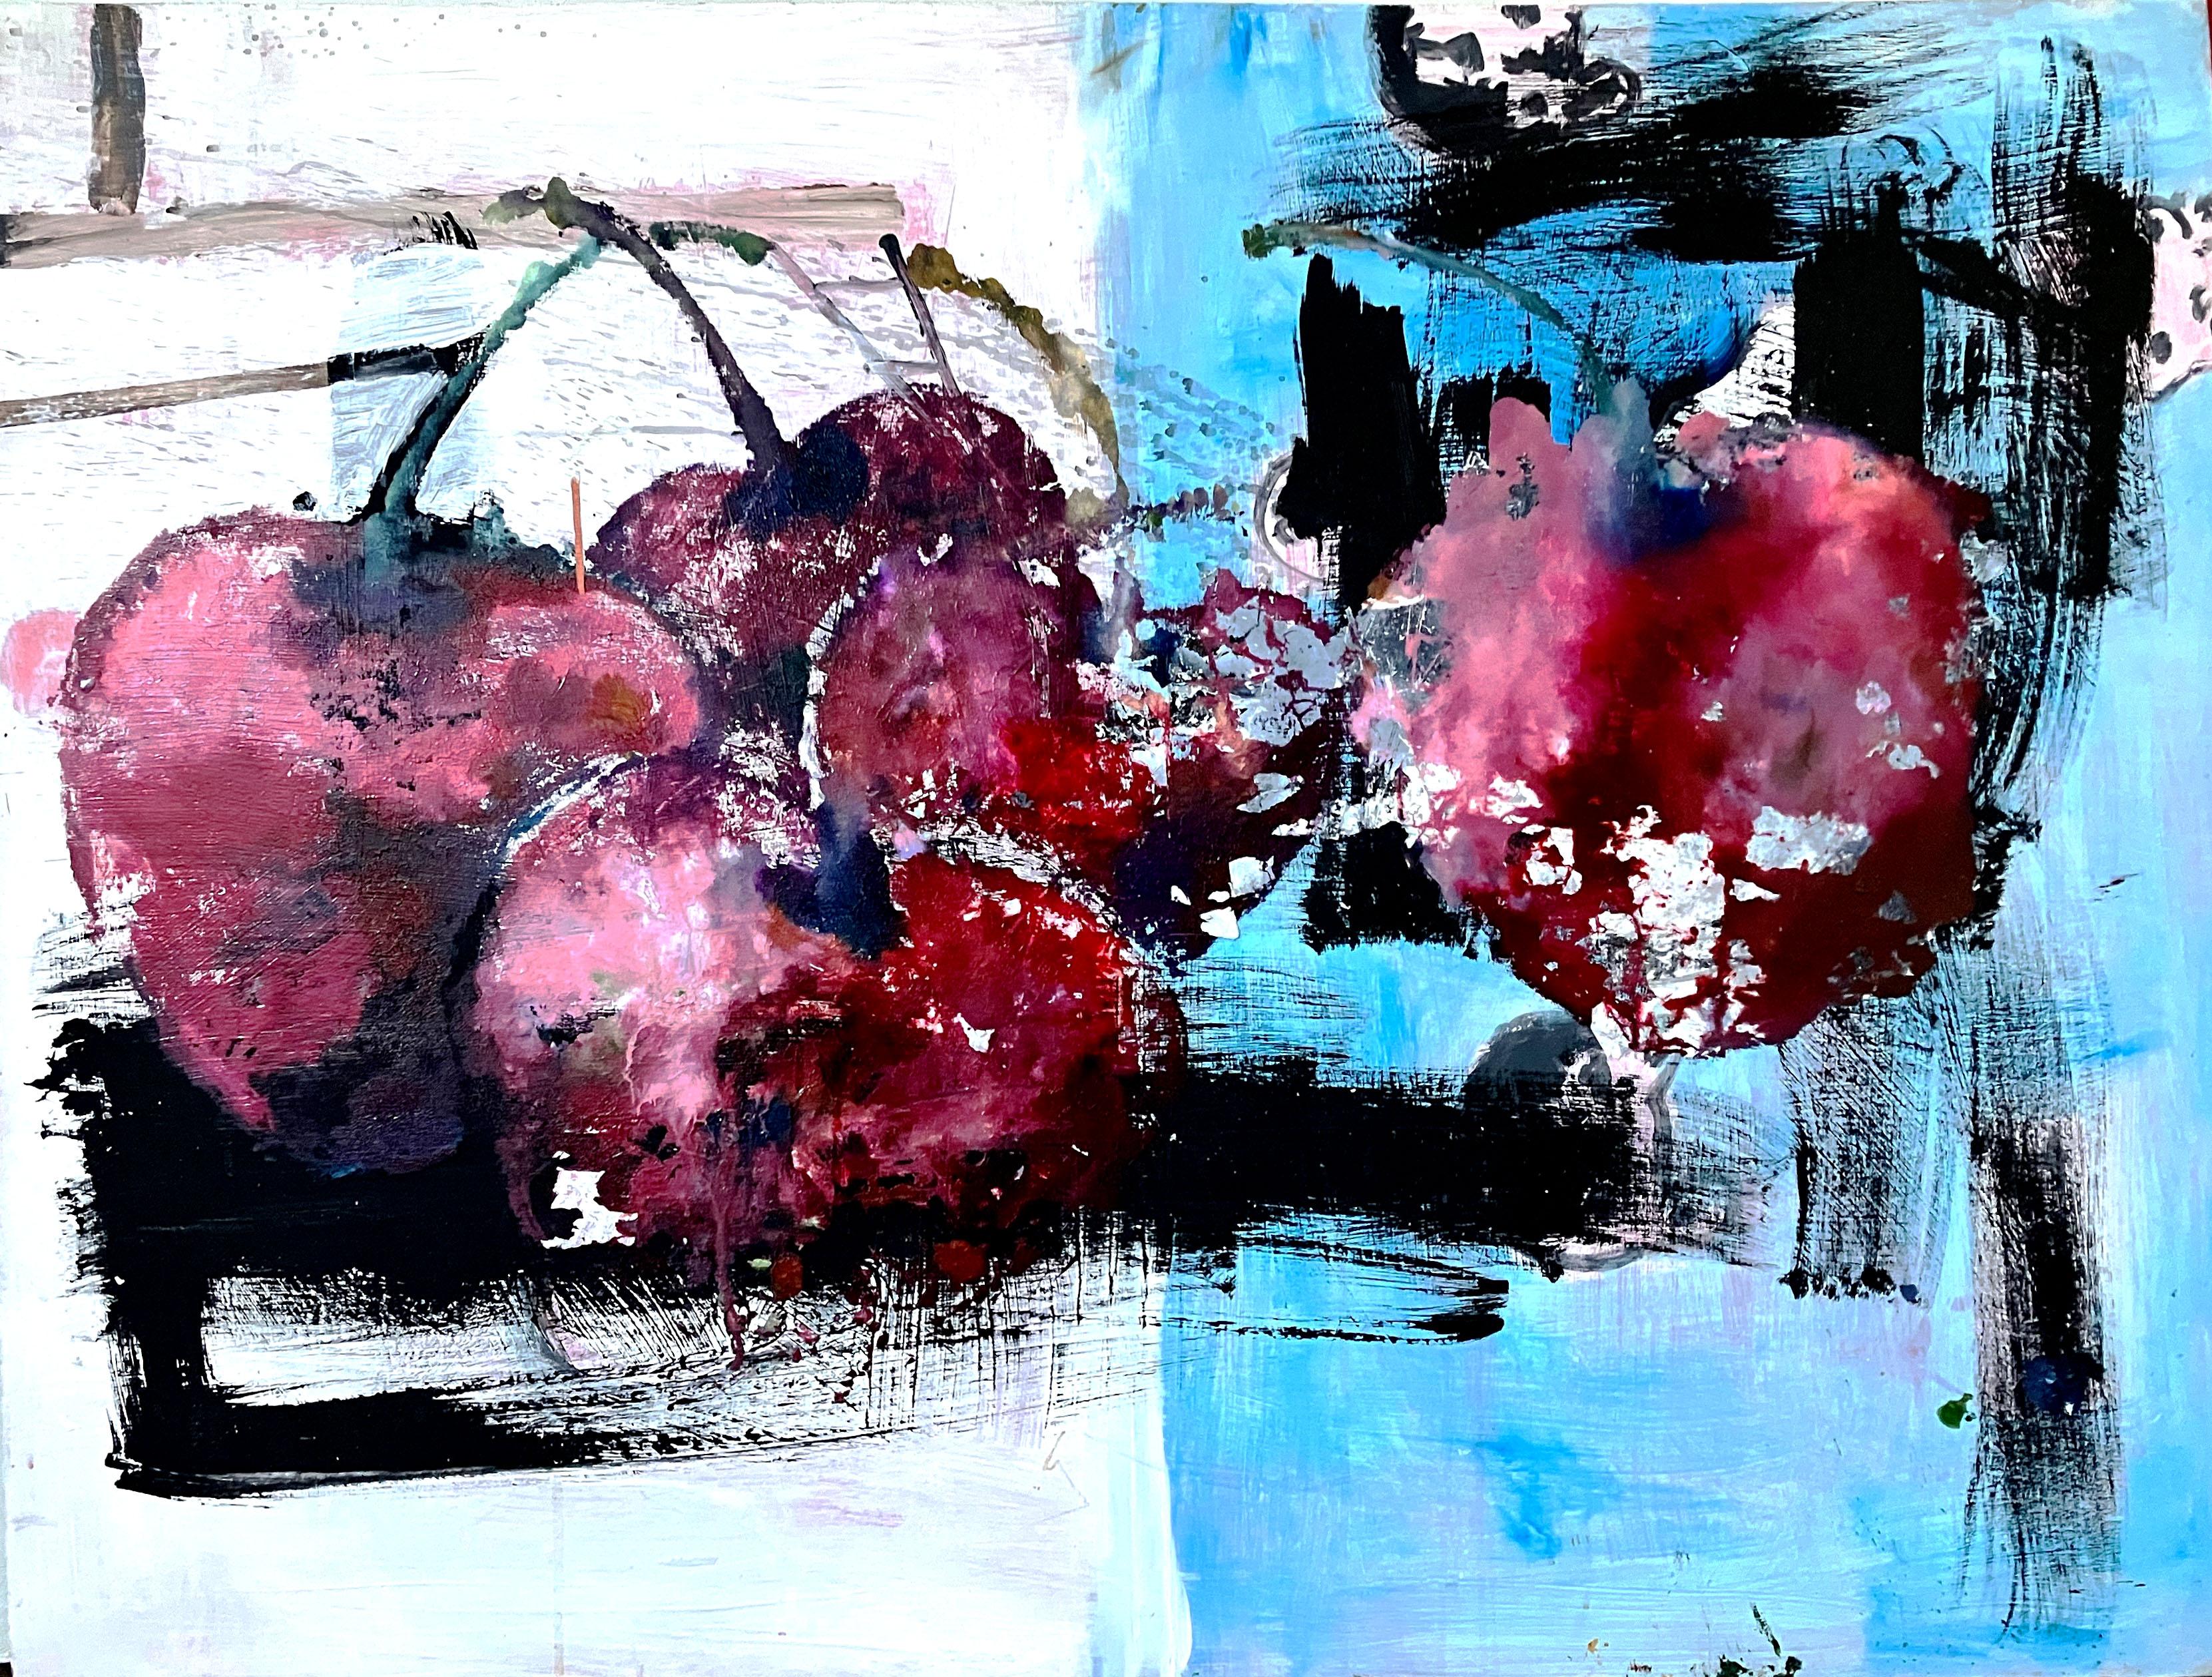 C. Dimitri Abstract Painting - Cherries, abstracted still life blue, white, fruit, brushwork